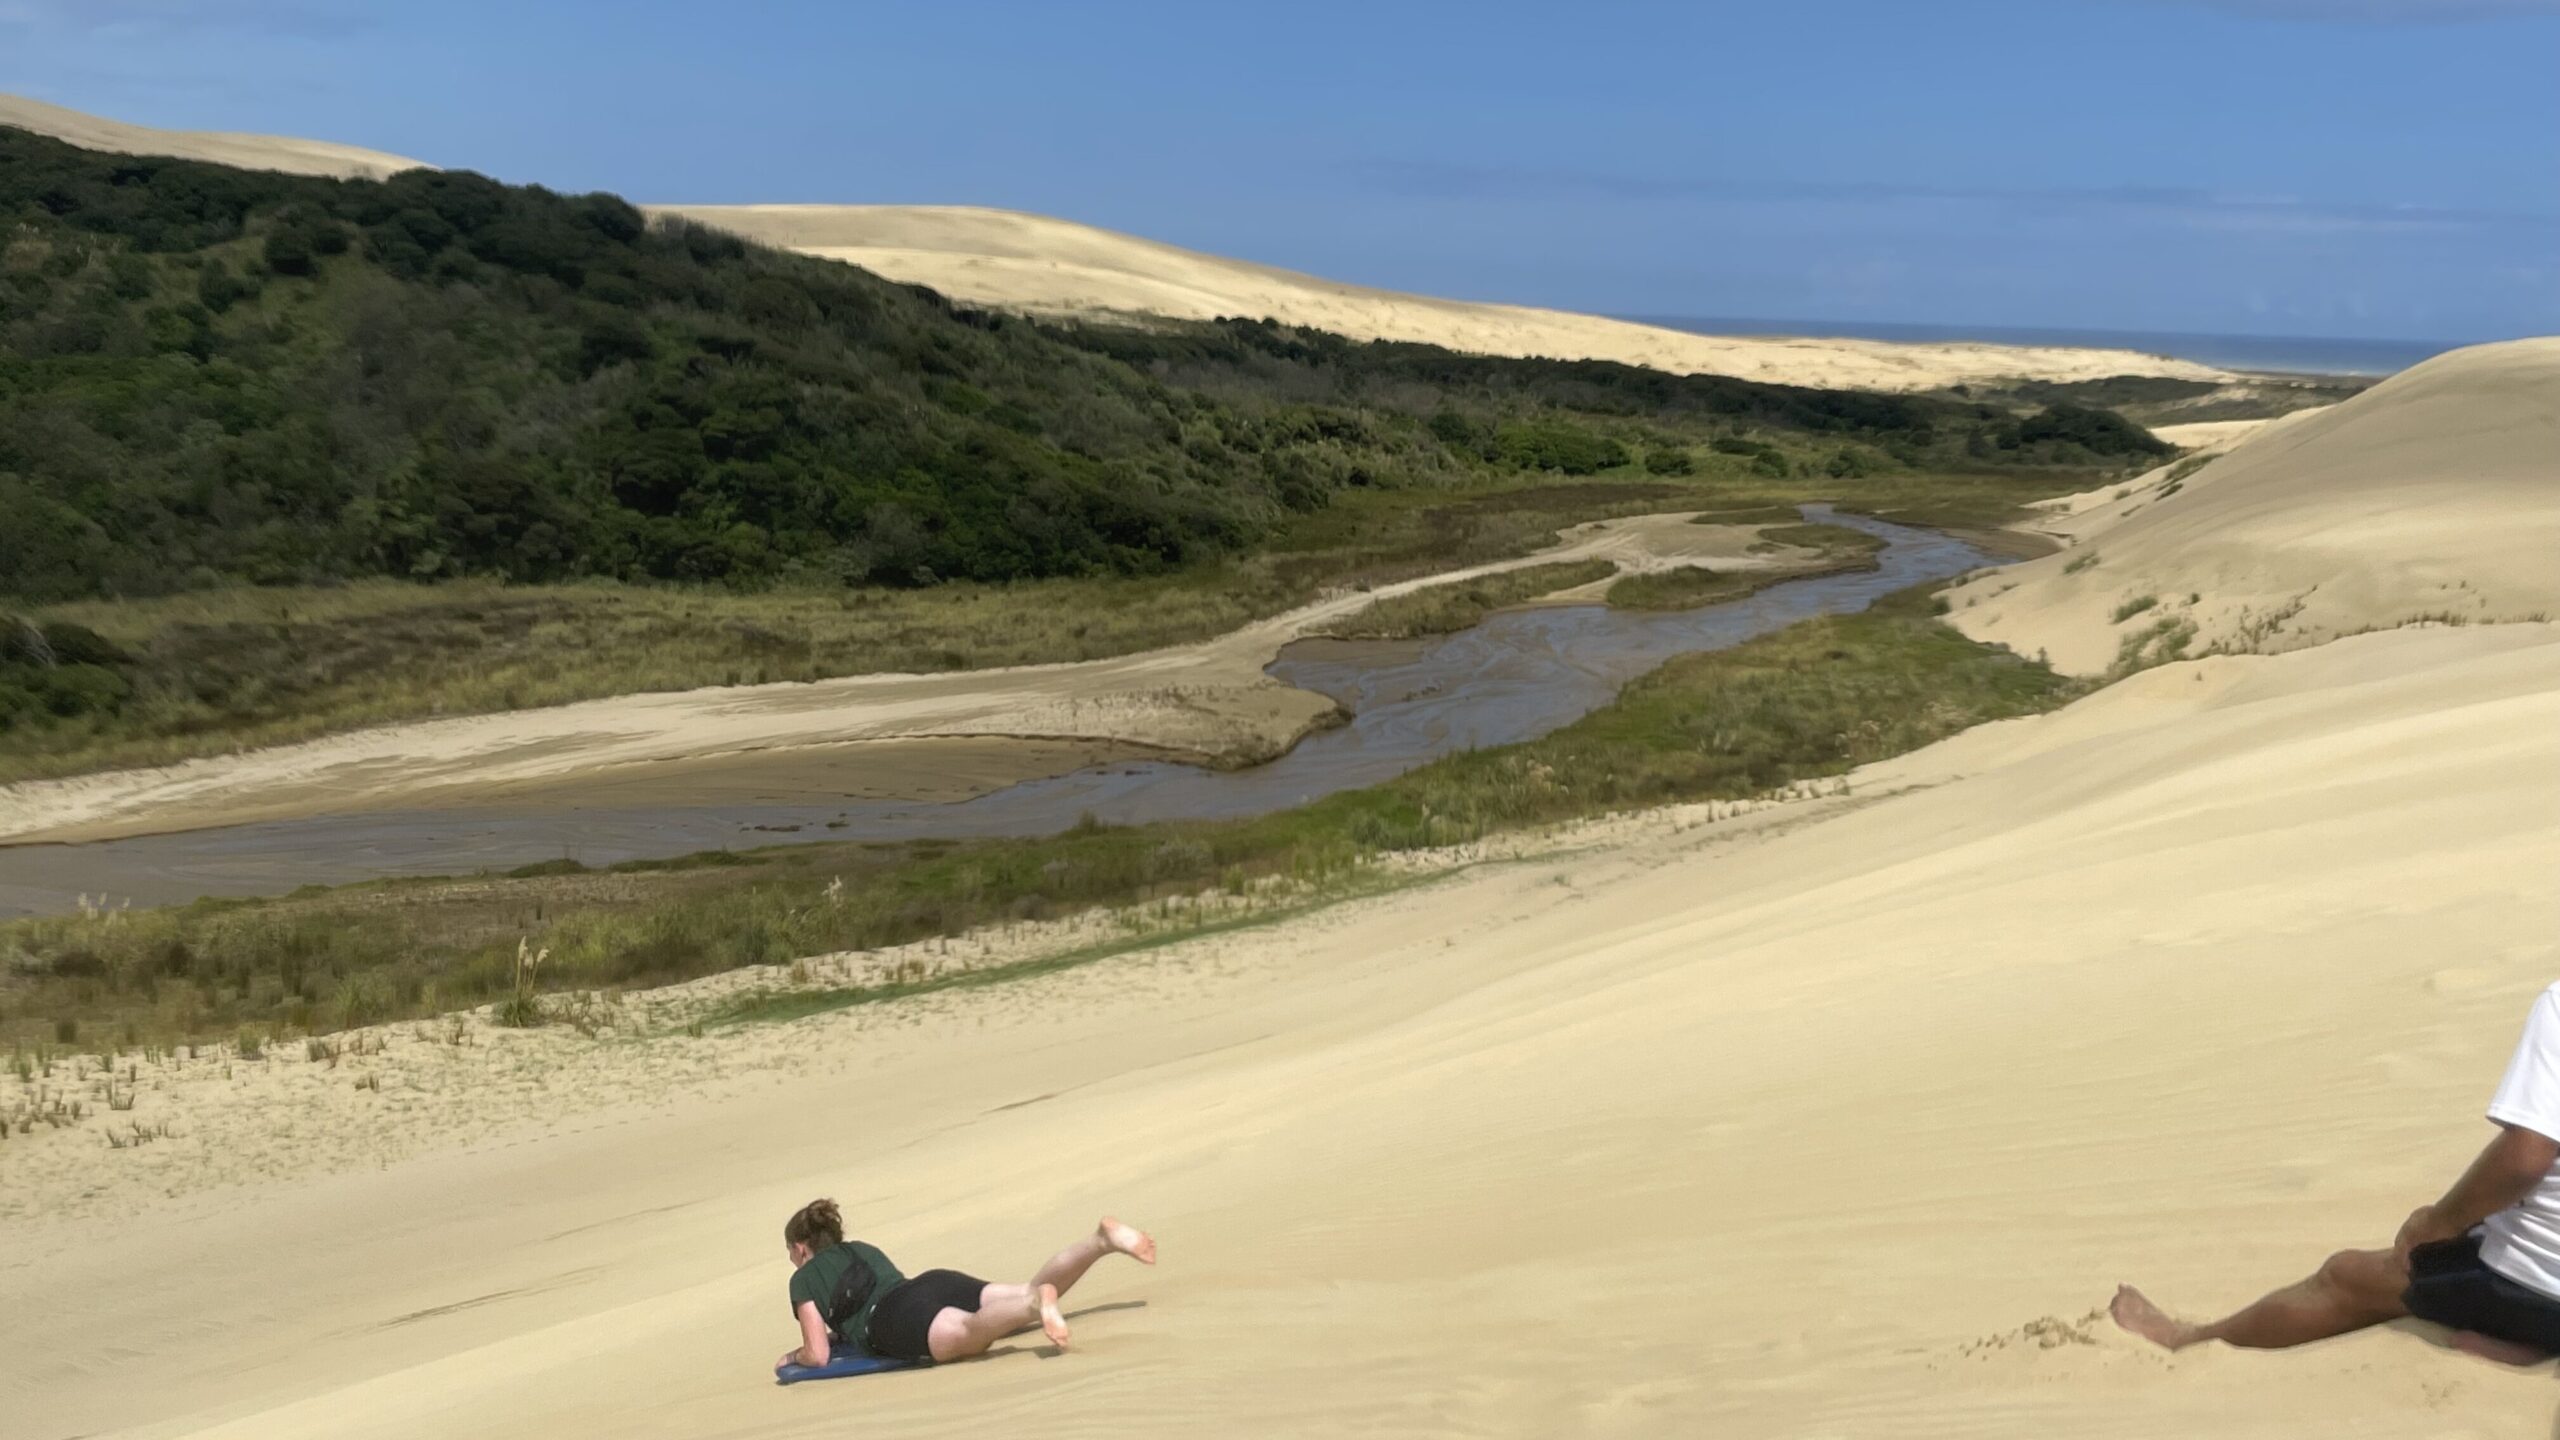 On top of a giant sand dune, someone is sliding down the dune on a sandboard with a river at the bottom and lush forest on the other side